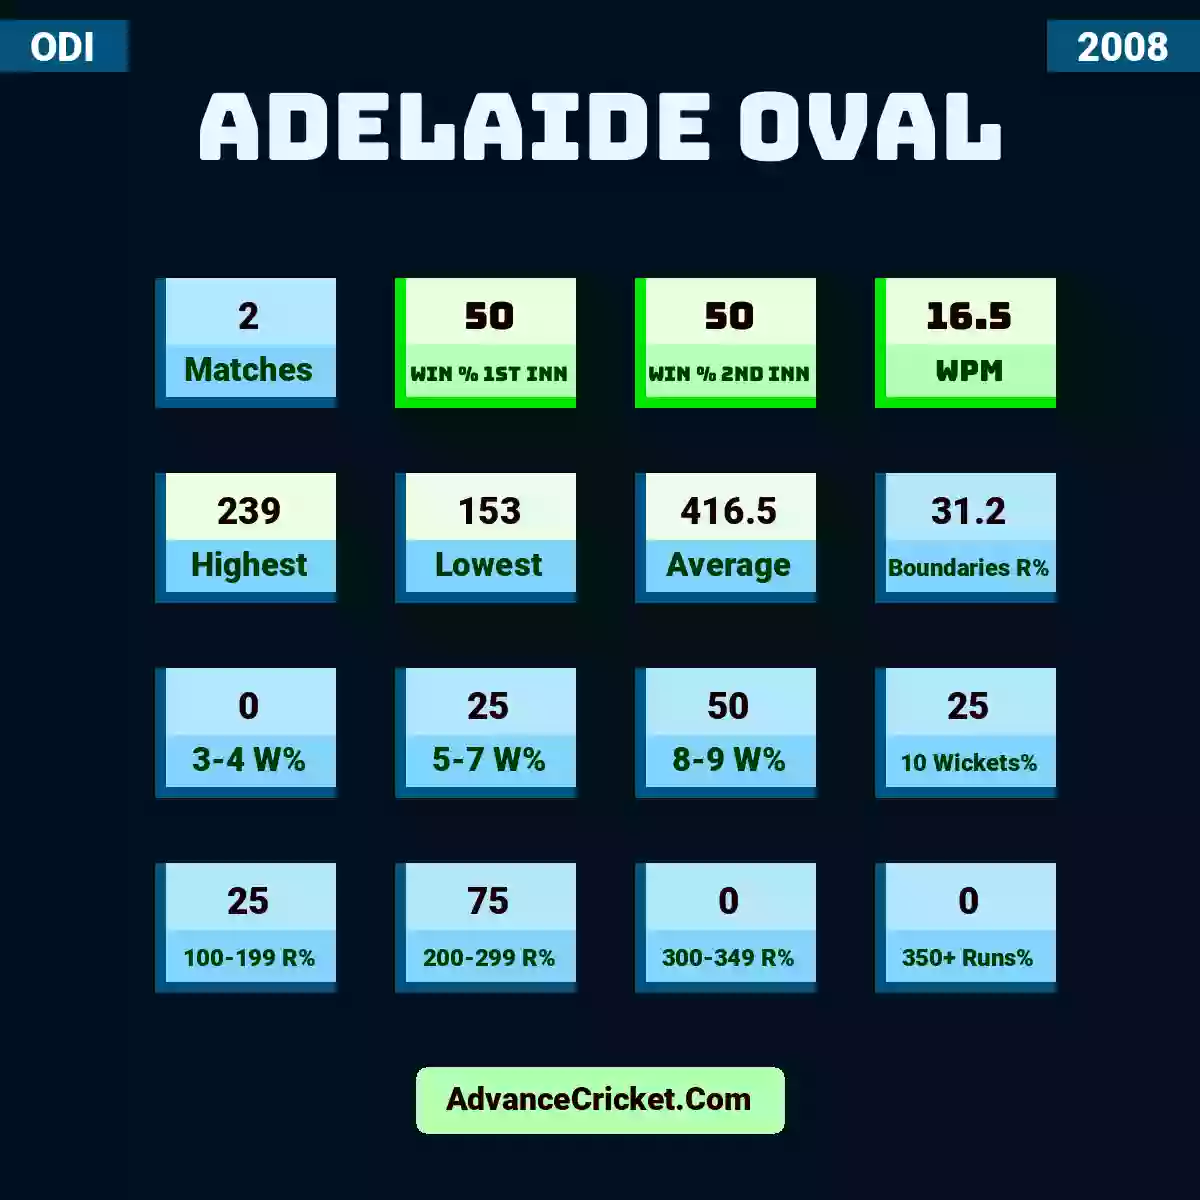 Image showing Adelaide Oval with Matches: 2, Win % 1st Inn: 50, Win % 2nd Inn: 50, WPM: 16.5, Highest: 239, Lowest: 153, Average: 416.5, Boundaries R%: 31.2, 3-4 W%: 0, 5-7 W%: 25, 8-9 W%: 50, 10 Wickets%: 25, 100-199 R%: 25, 200-299 R%: 75, 300-349 R%: 0, 350+ Runs%: 0.